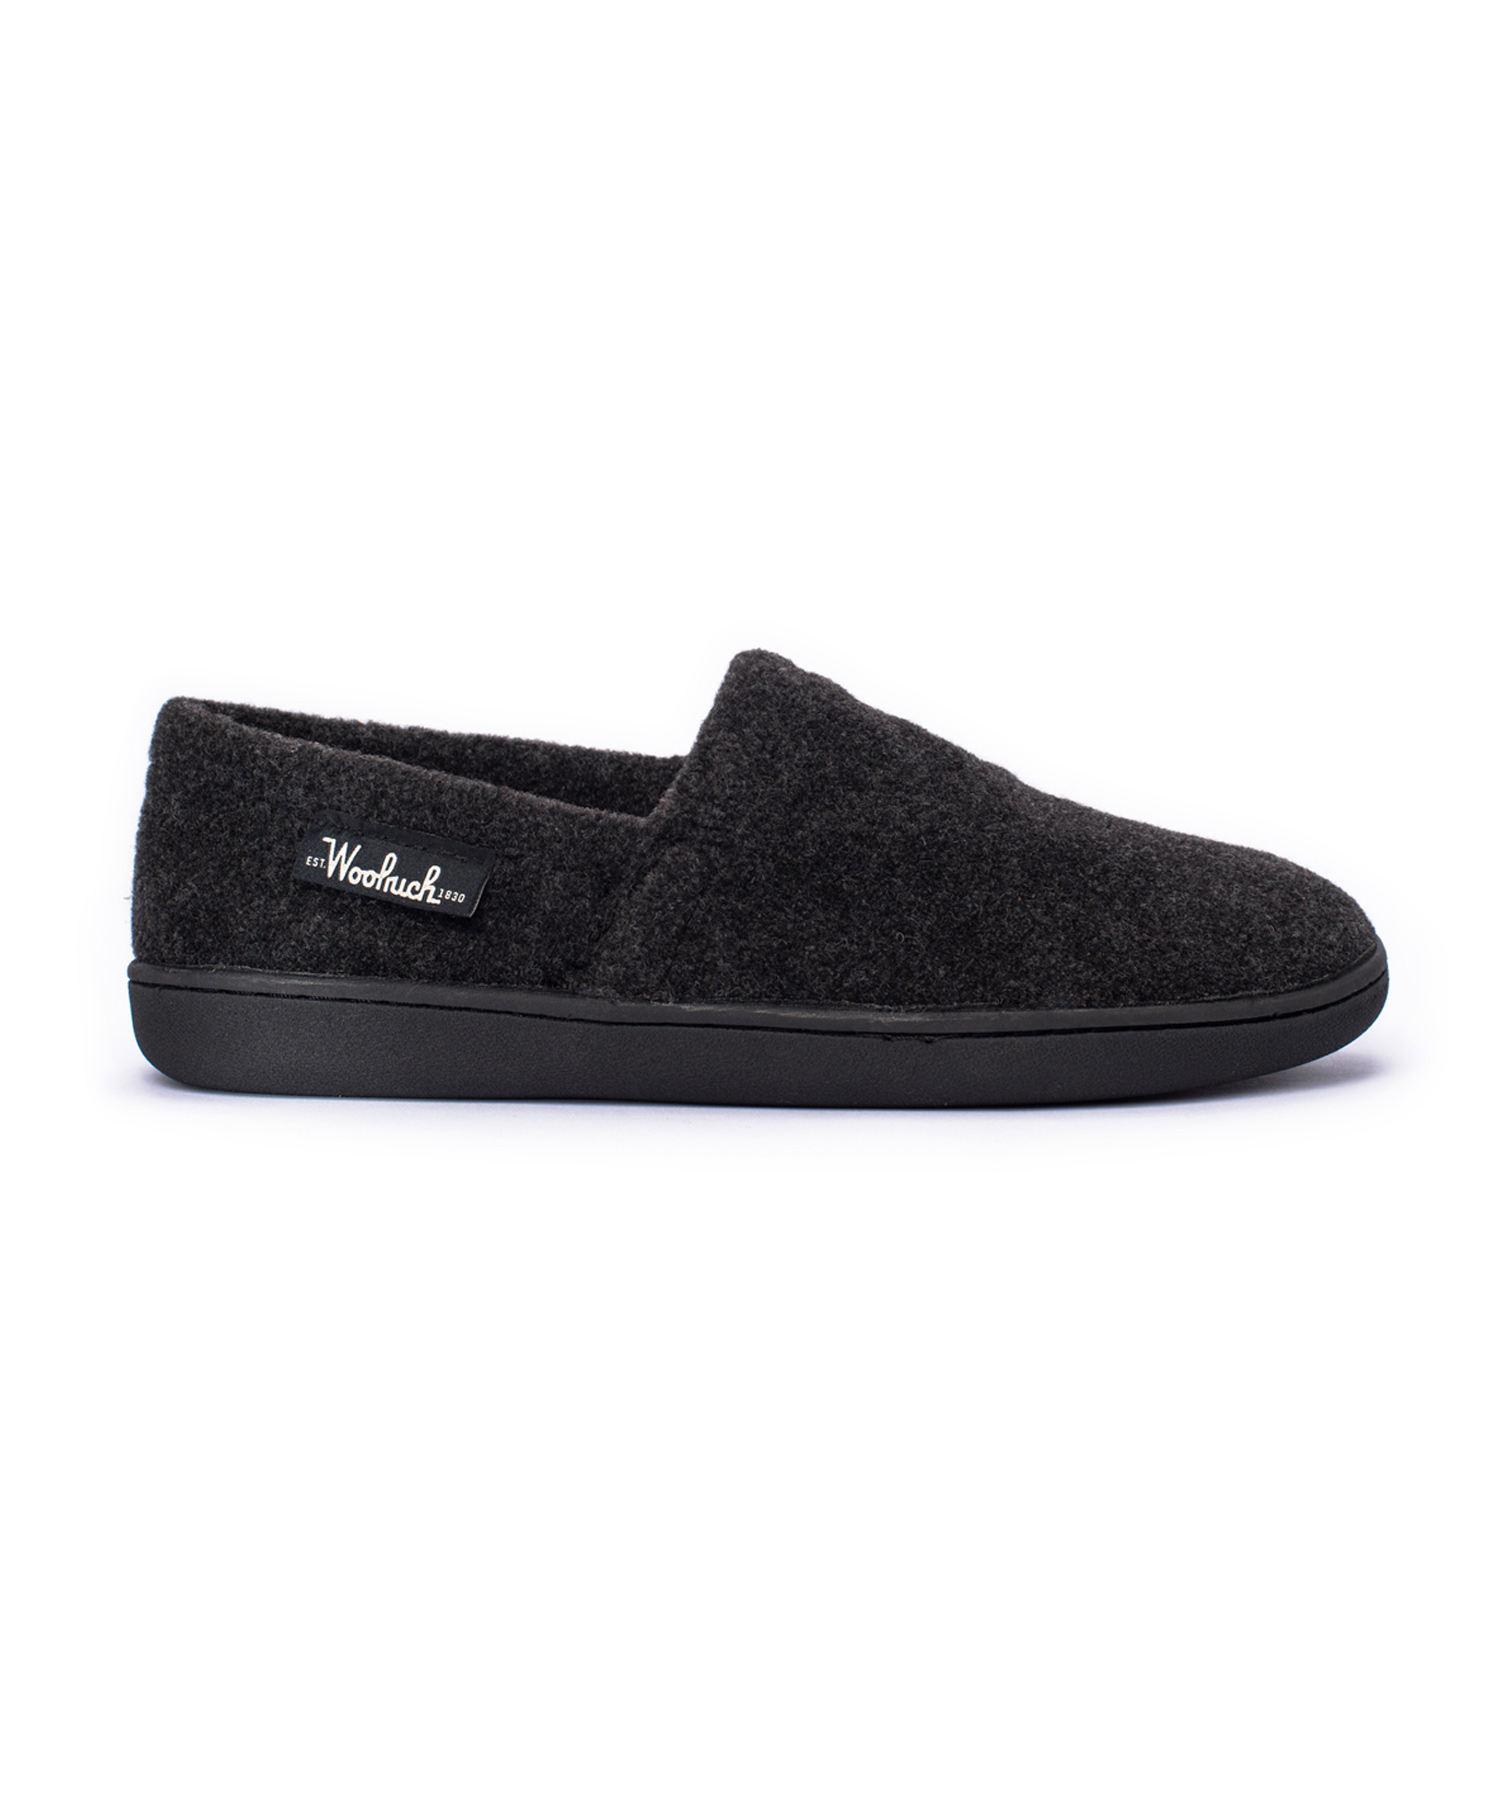 woolrich slippers canada